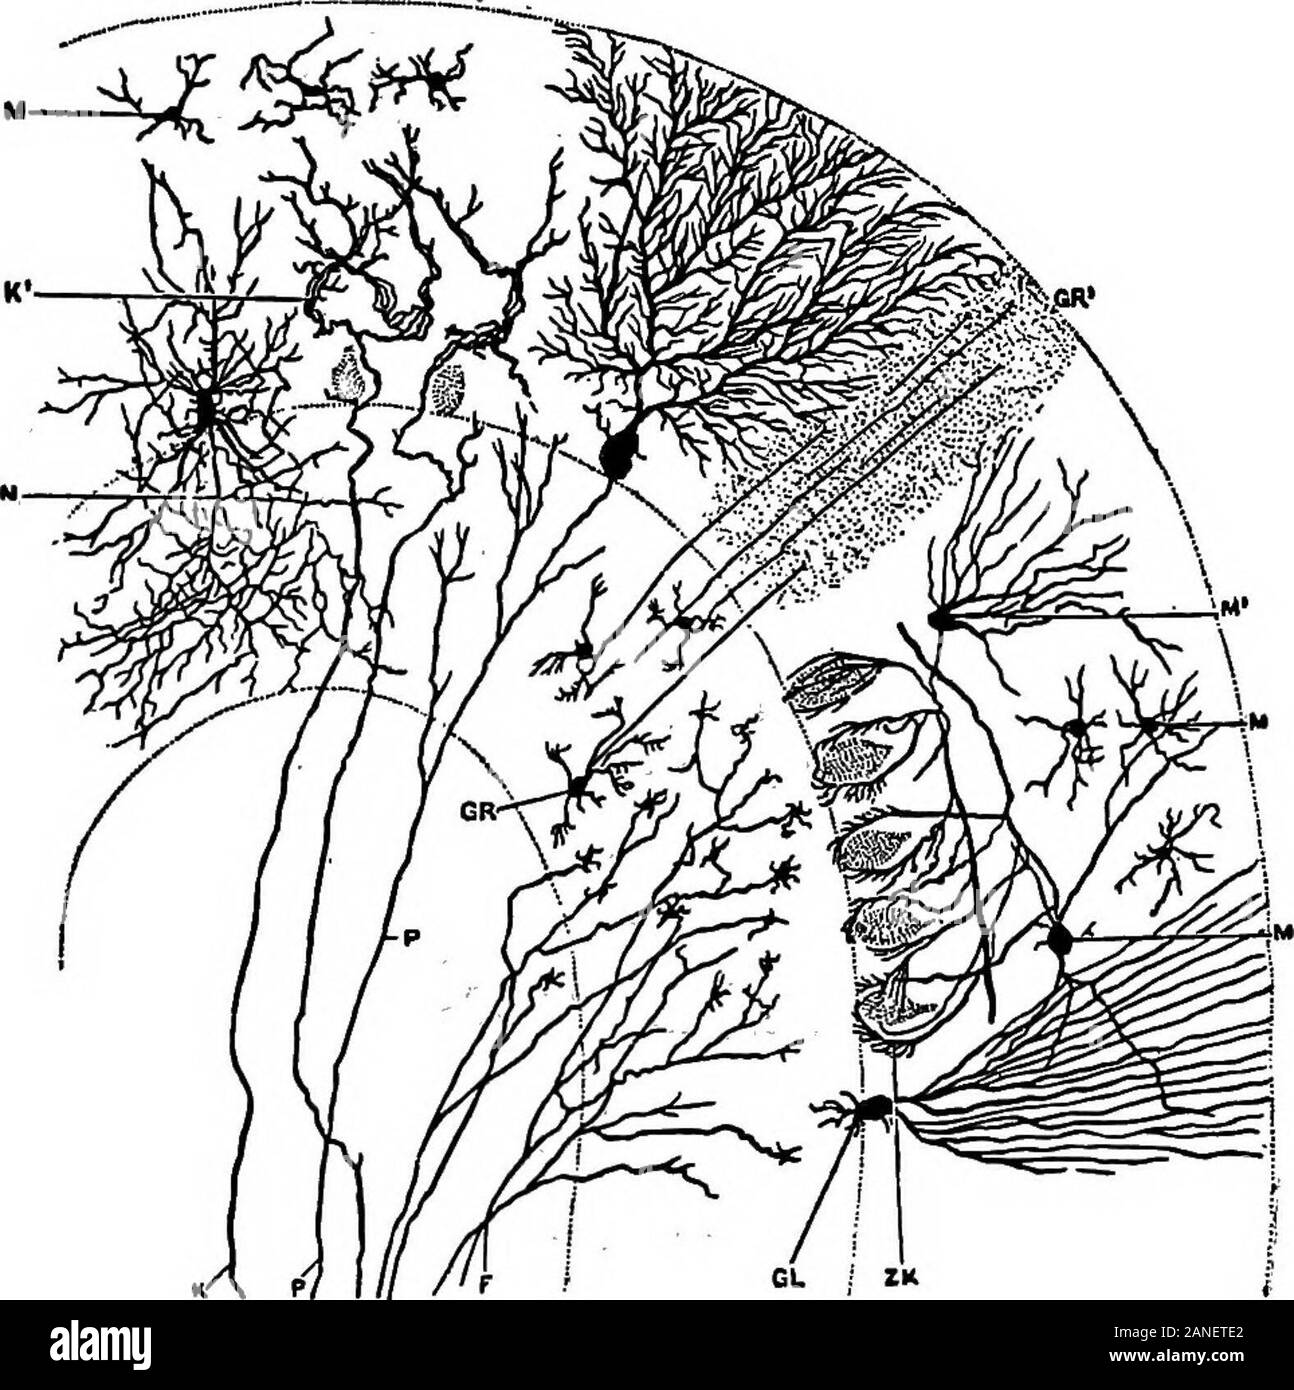 The encyclopdia britannica; a dictionary of arts, sciences, literature and general information . a small number of blood vessels. The cortex (see fig. 7) consists of a thin layer of grey materialforming an outer coat of somewhat varying thickness over the wholeexternal surface  of the laminae of the organ. When examinedmicroscopically it is found to be made up of two layers, an outer molecular and an inner granular layer. Forming a layerlying at the junction of these two are a number of cells, the cellsof Purkinje, which constitute the most characteristic feature of thecerebellum. The bodies o Stock Photo